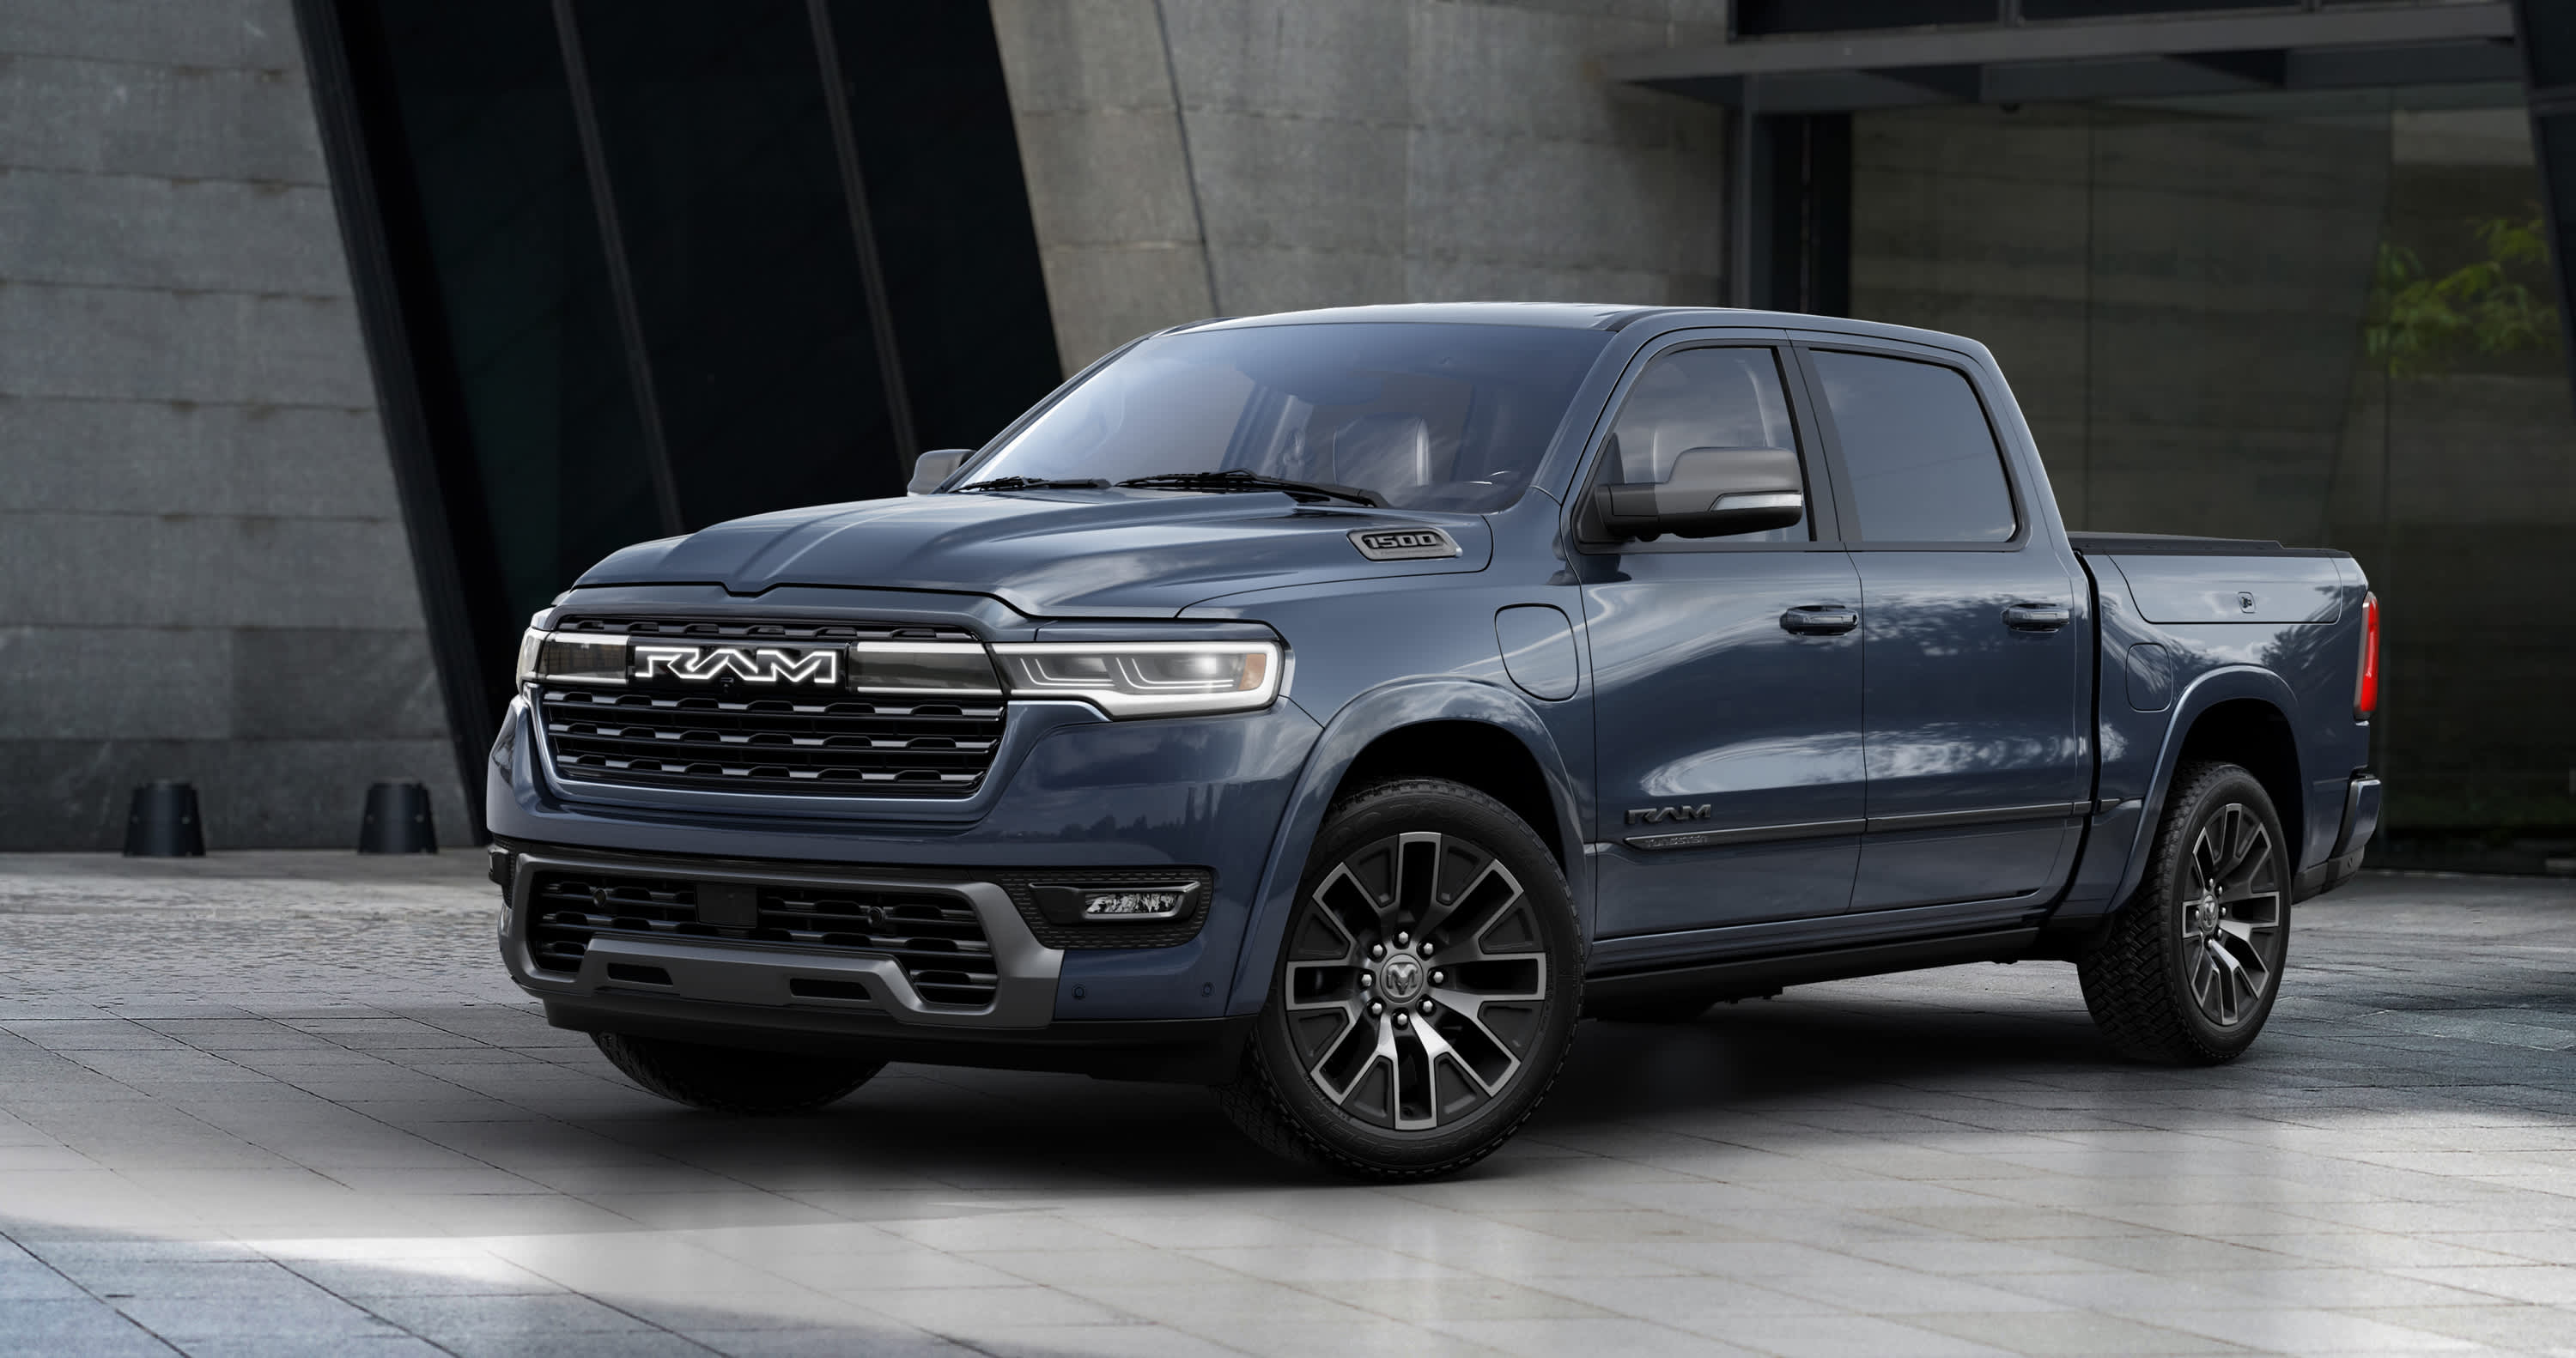 The new Ram pickup has a gas-powered electric generator